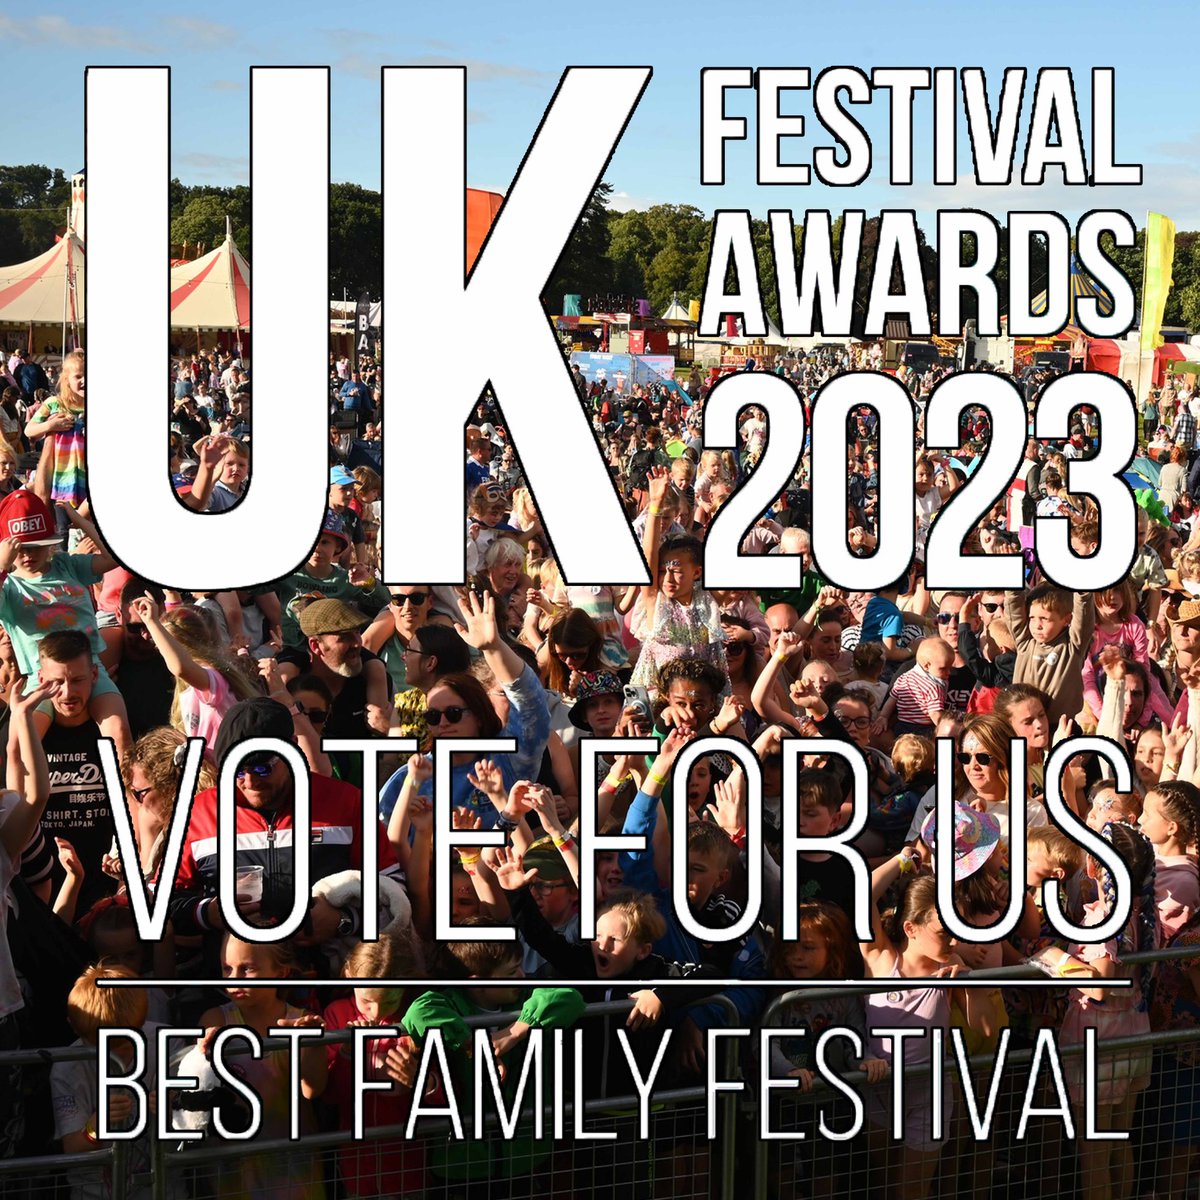 There's only 2 week's left to vote Gloworm for 'Best family festival' and 'Best medium-sized festival' in the UK festival awards 2023! Voting closes on Monday 23rd October 🤩 Vote now if you haven't already at surveymonkey.co.uk/r/GQPMKBR 🤞🏽